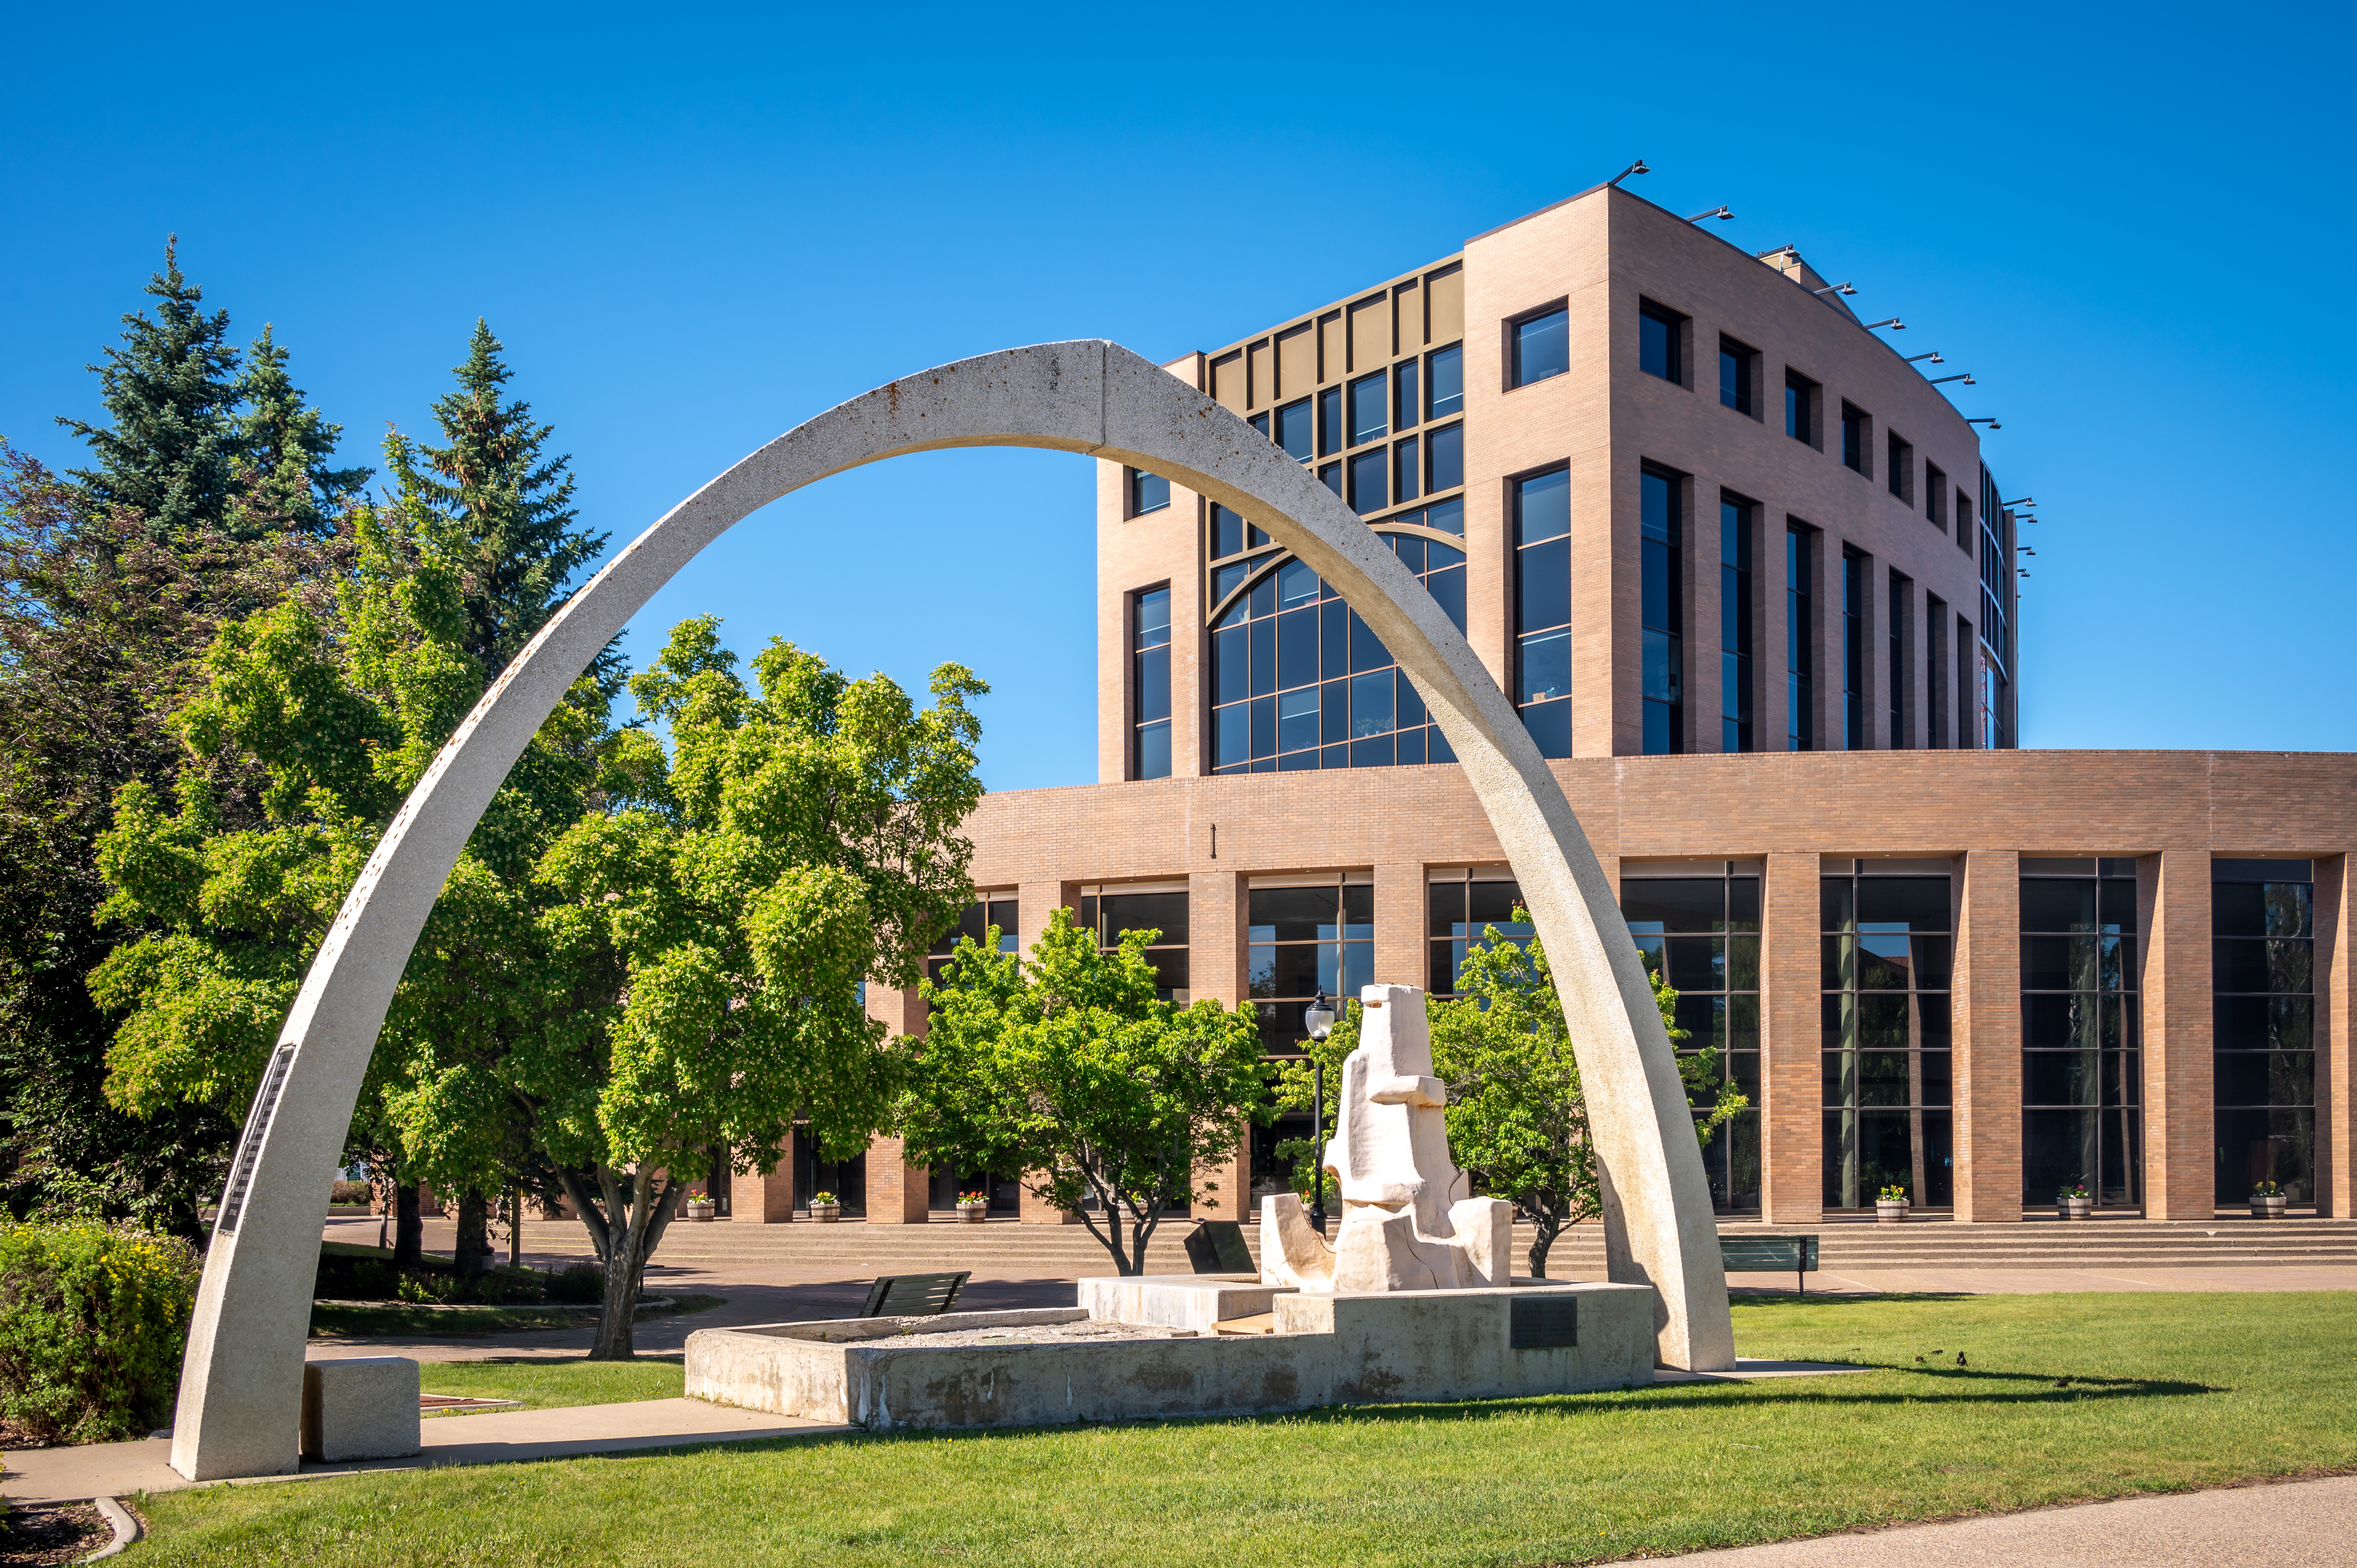 Connecting Utilities in the City of Lethbridge